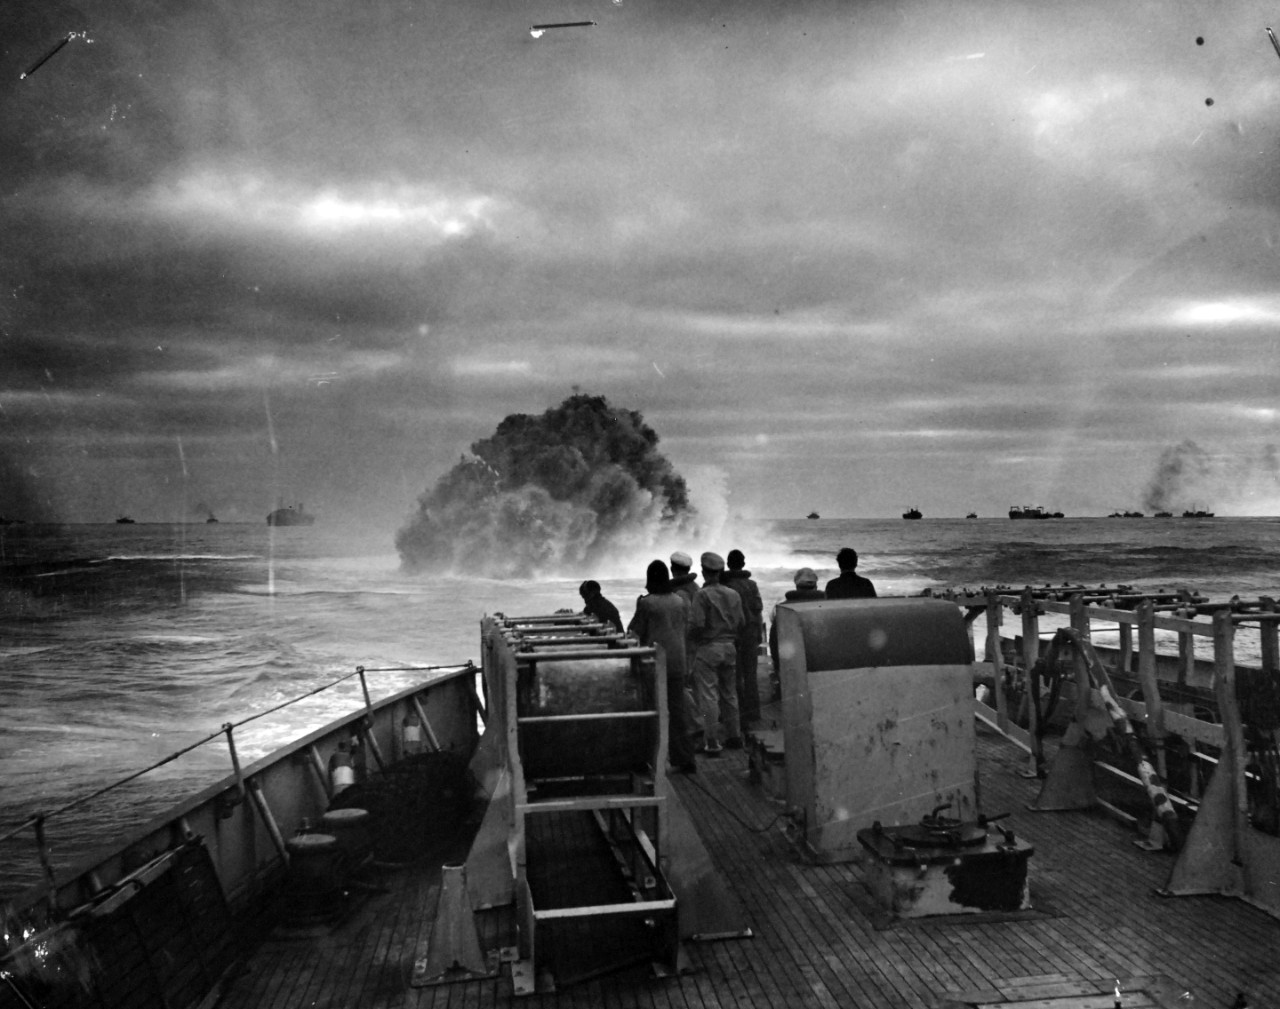 <p>26-G-1517: Sinking of German submarine U-175, April 1943. The submarine was sunk off south-west of Ireland by USCGC Spencer (WPG-36) on April 17, 1943. Official Caption: &quot;COAST GUARD CUTTER SINKS SUB: Coast Guardsmen on the deck of the U.S. Coast Guard Cutter USCGC SPENCER (WPG-36) watch the explosion of a depth charge which blasted a Nazi U-Boat's hope of breaking into the center of a large convoy. The depth charge tossed from the 327-foot cutter blew the submarine to the surface, where it was engaged by Coast Guardsmen. Ships of the convoy may be seen in the background.&quot; Date: 17 April 1943. Official U.S. Coast Guard Photograph, now in the collections of the National Archives. (2017/09/05).</p>
